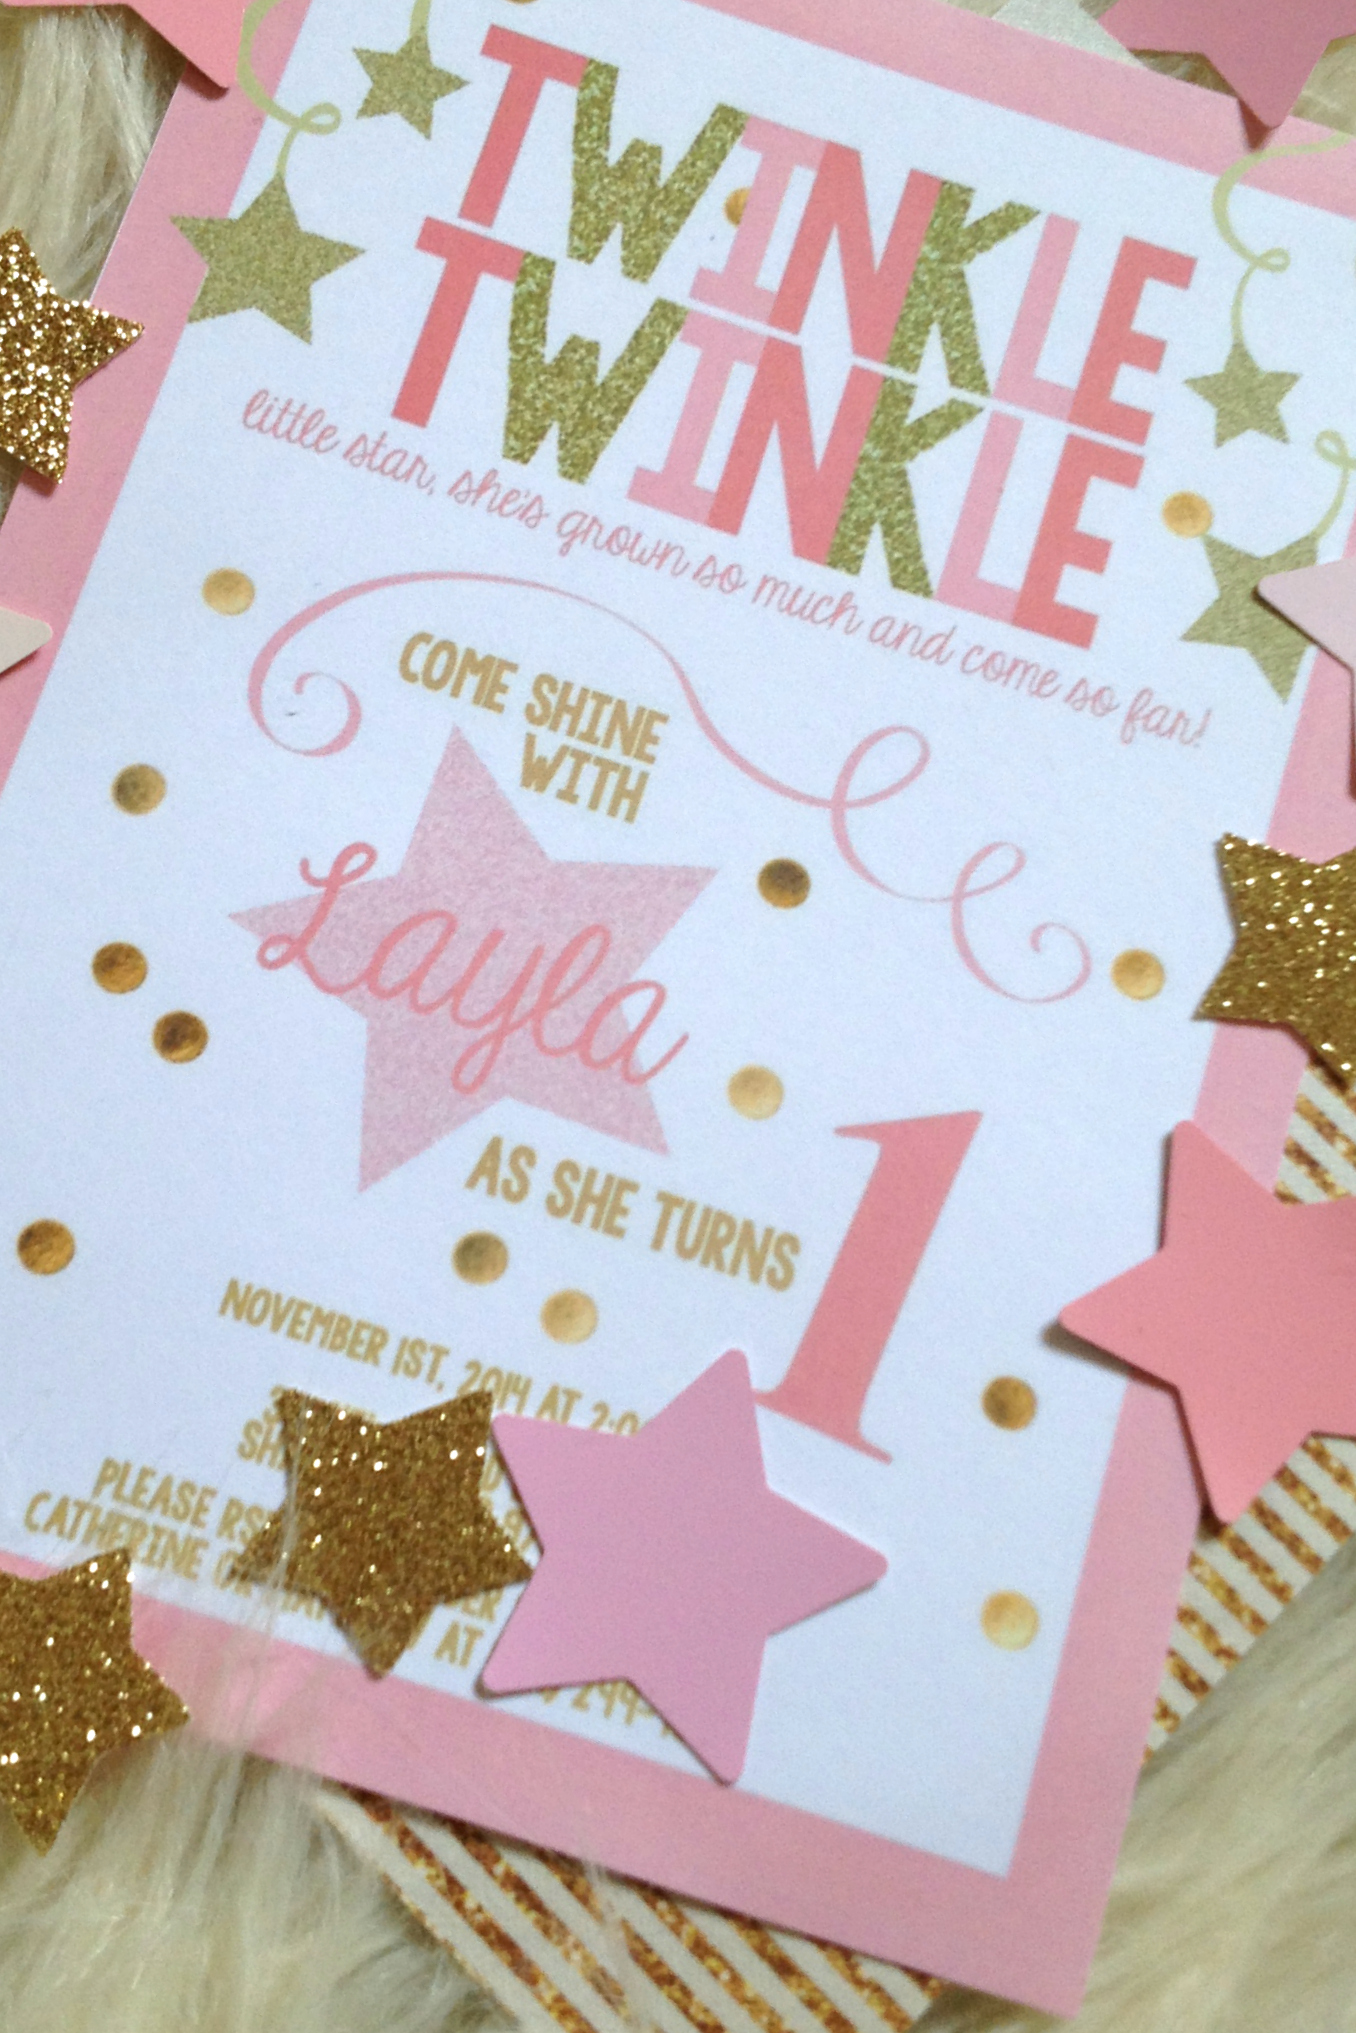 NAVY AND GOLD TWINKLE TWINKLE LITTLE STAR FIRST BIRTHDAY PARTY